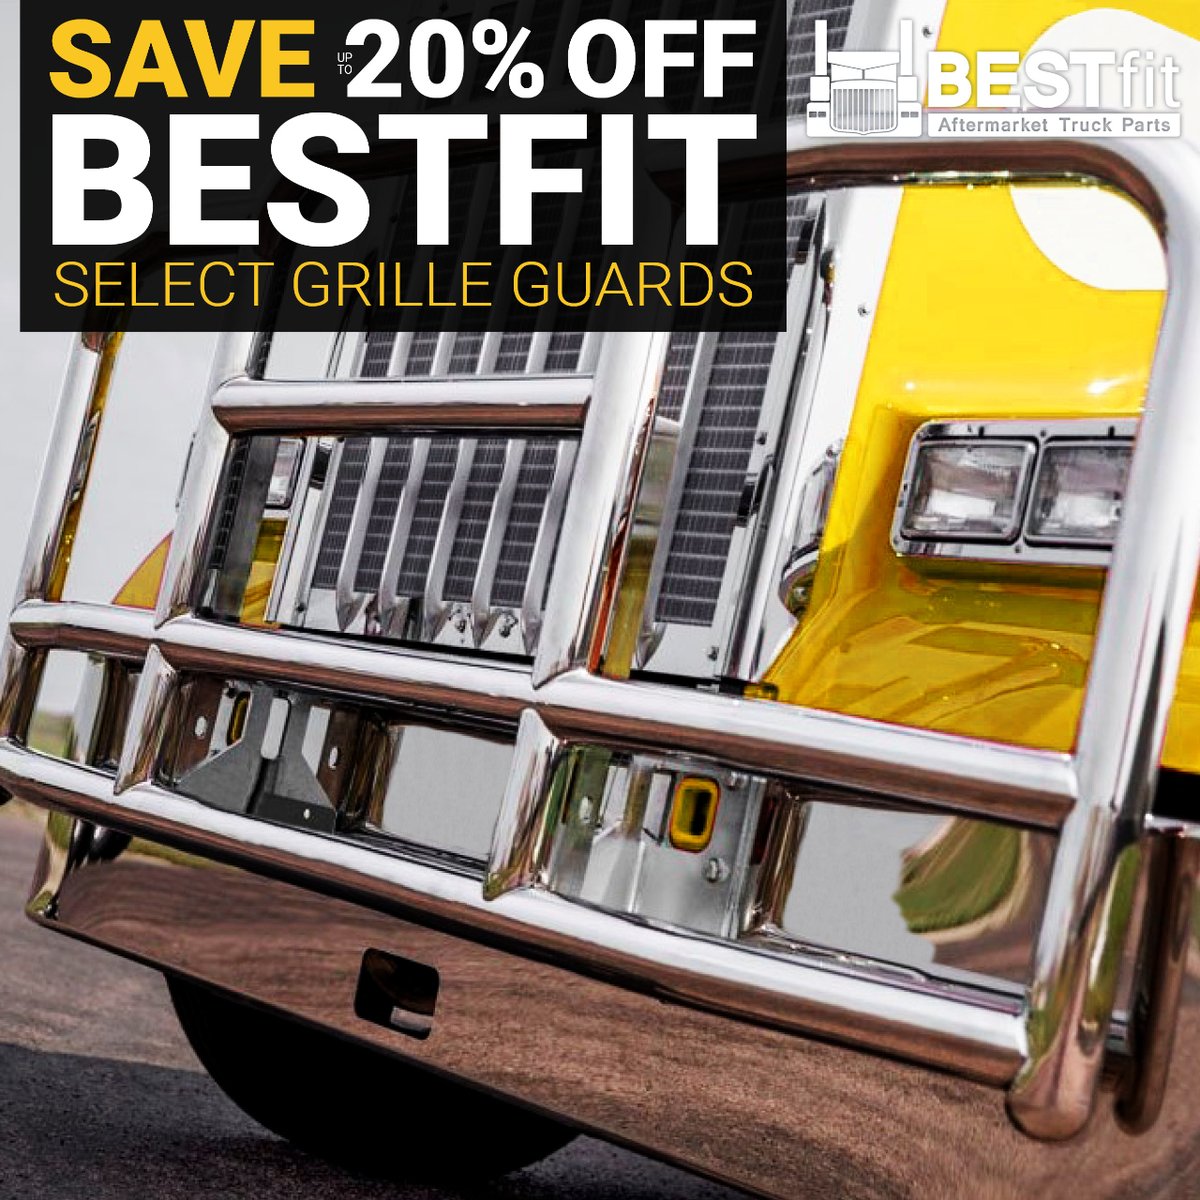 So many incredible Steals & Deals this month, and they're not done yet❕ Get 20% OFF on select BESTfit Grille Guards: 4statetrucks.com/sales_promo_1/ Ends 4/30 11:59 p.m. cst.  #4StateTrucks #ChromeShopMafia #chrome #customtrucks #trucking #bigrig #truckers #diesel #grilleguard